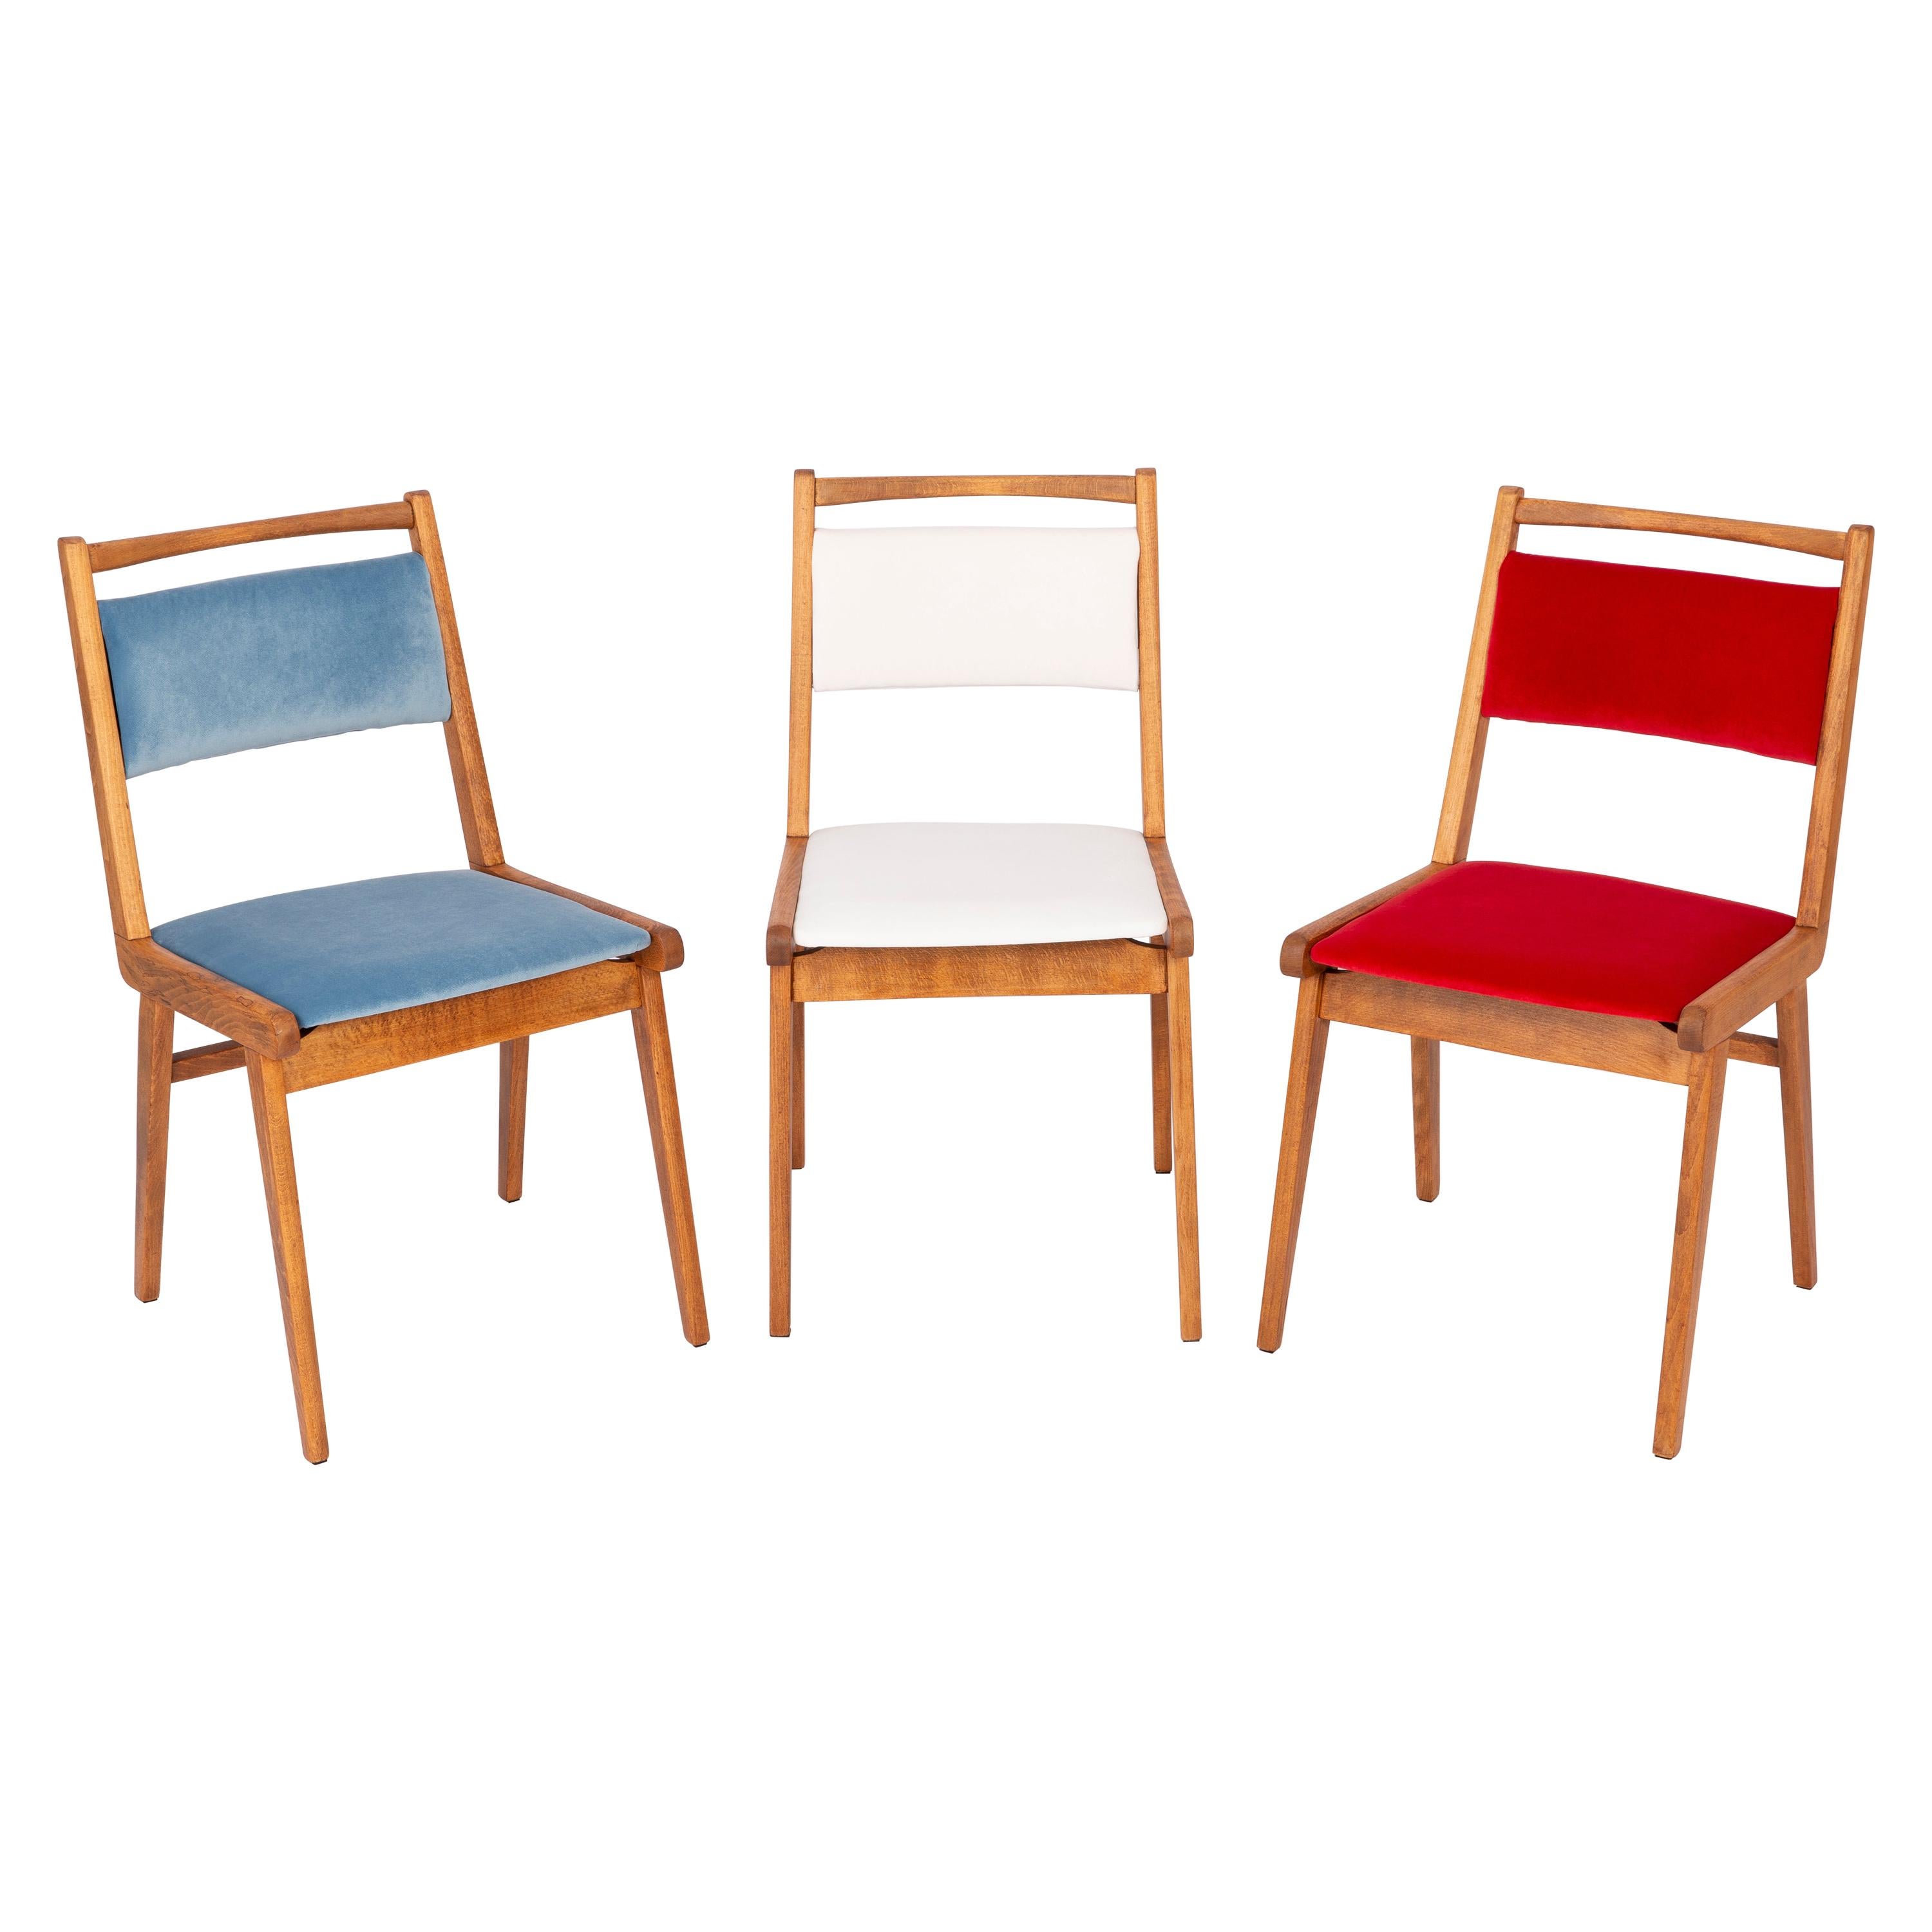 Set of Three 20th Century Blue White and Red Velvet Chairs, Poland, 1960s